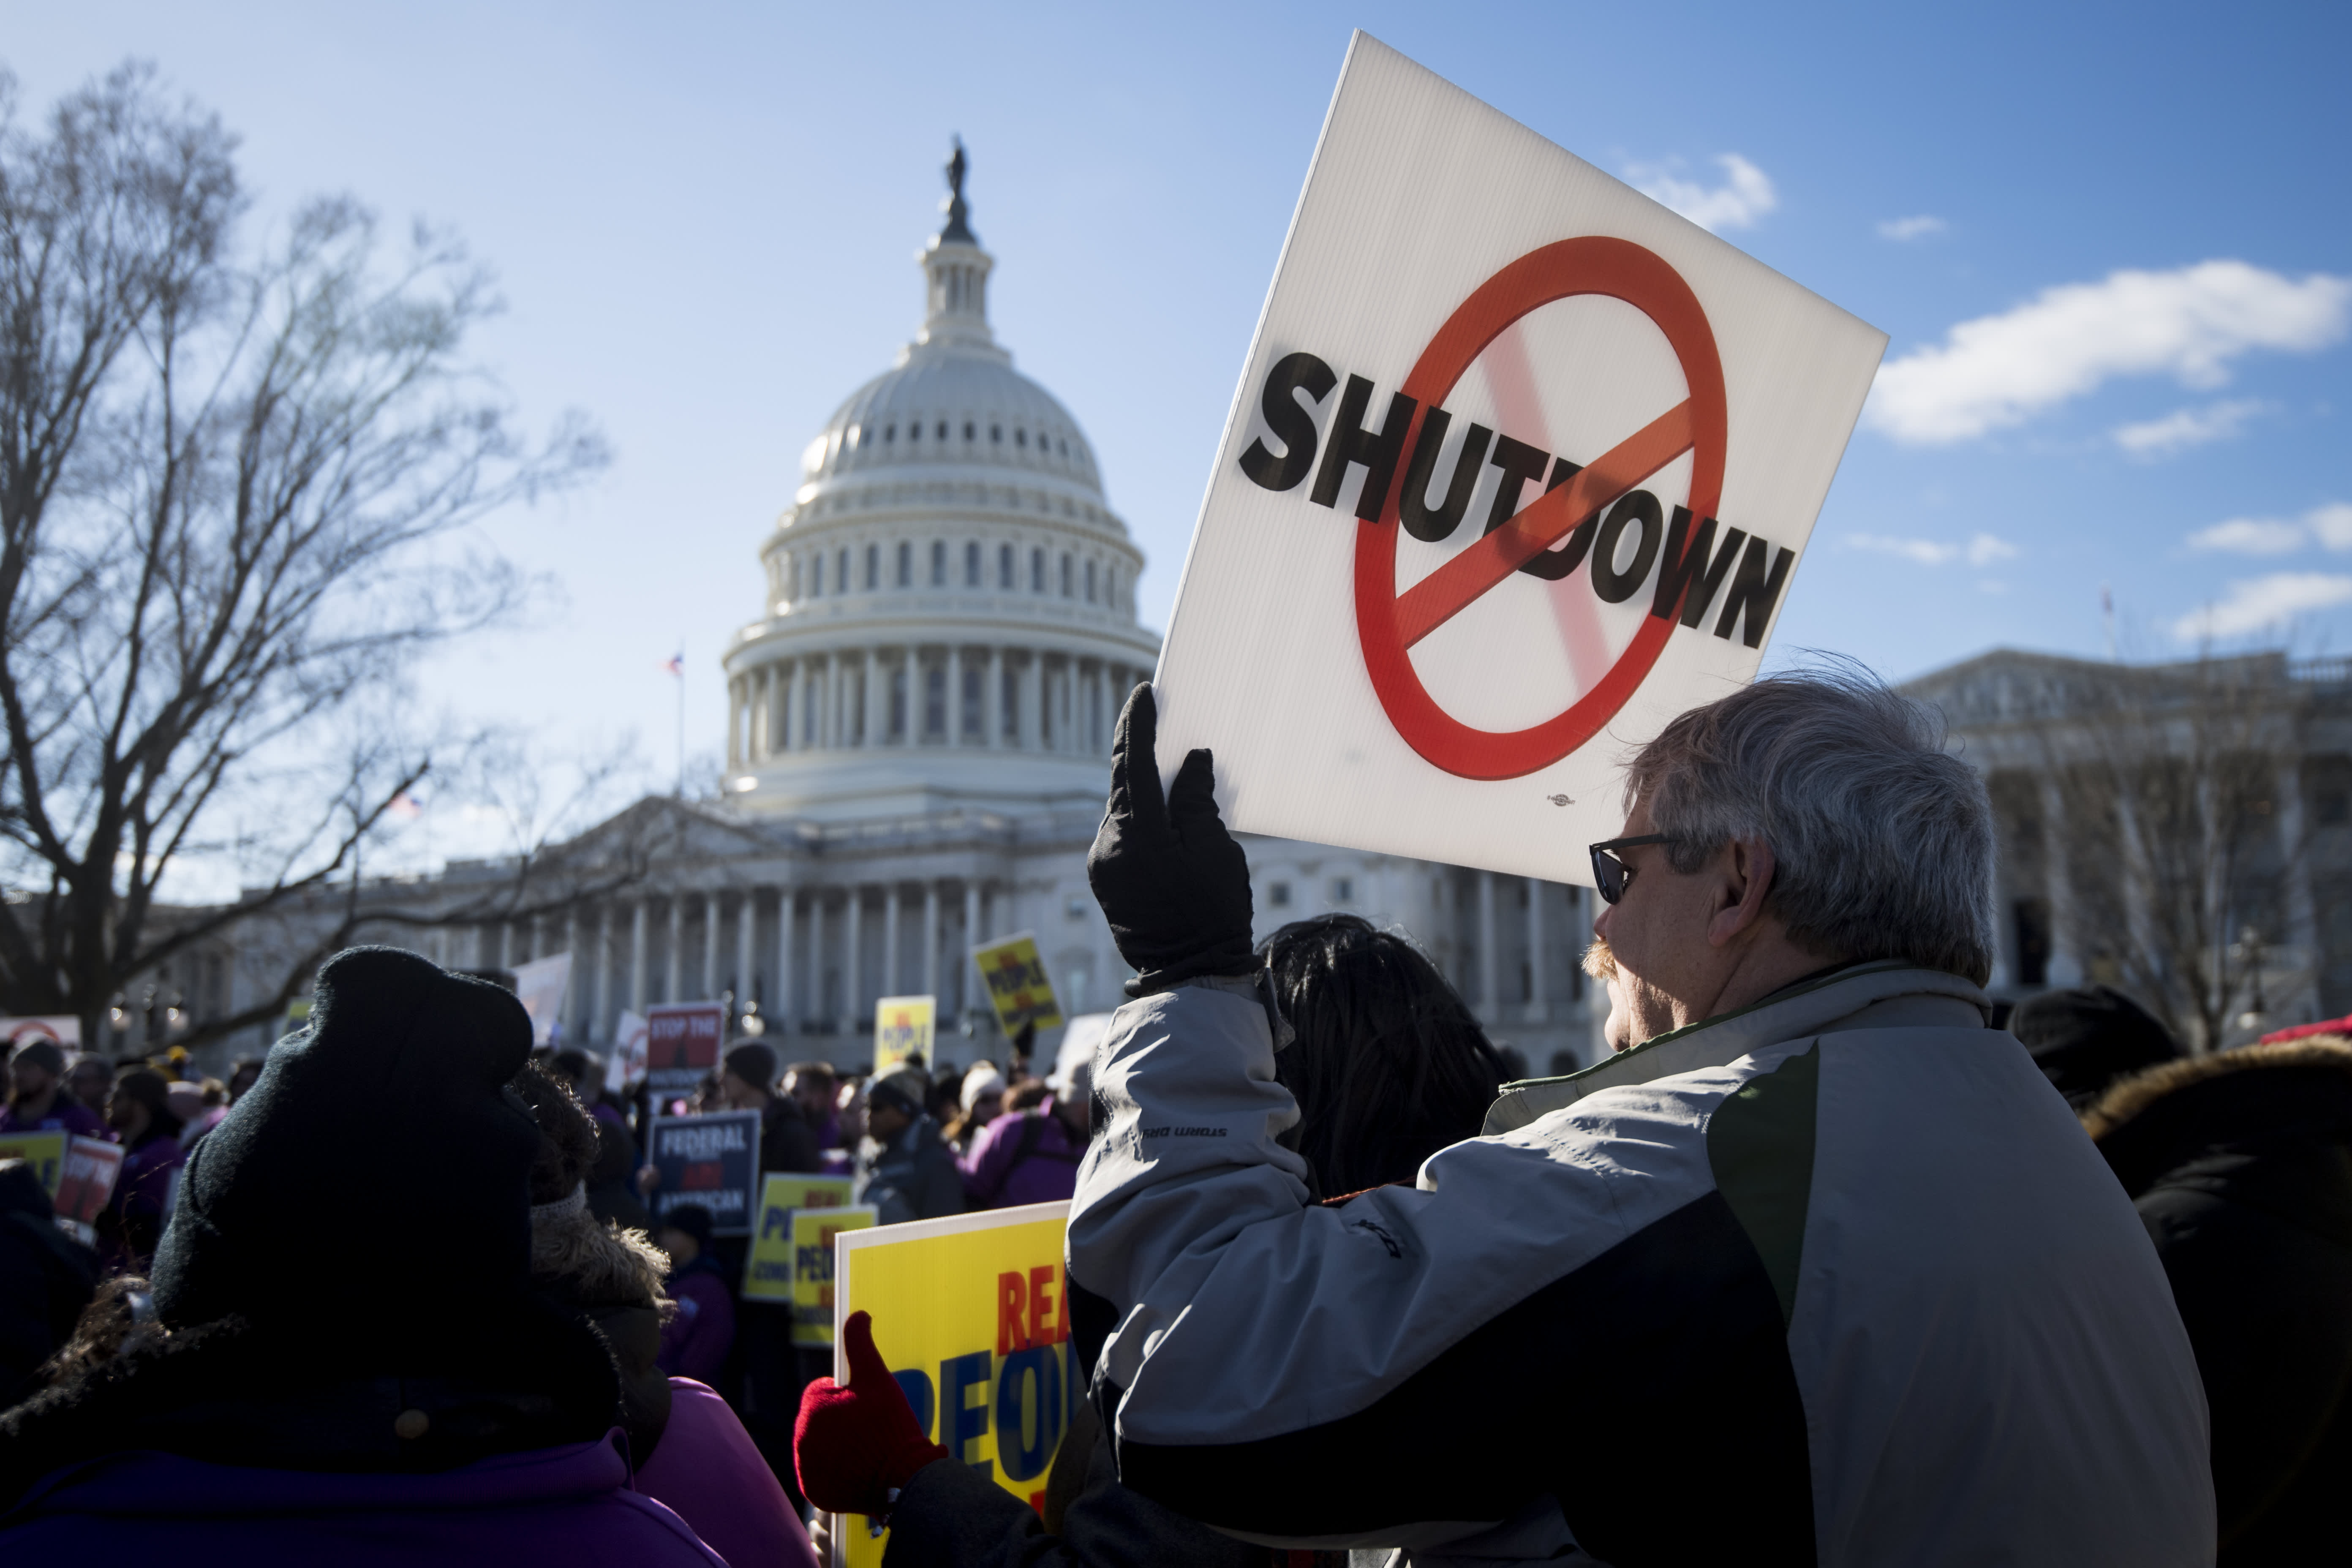 The government shutdown faces mounting lawsuits, including over 'involuntary servitude'